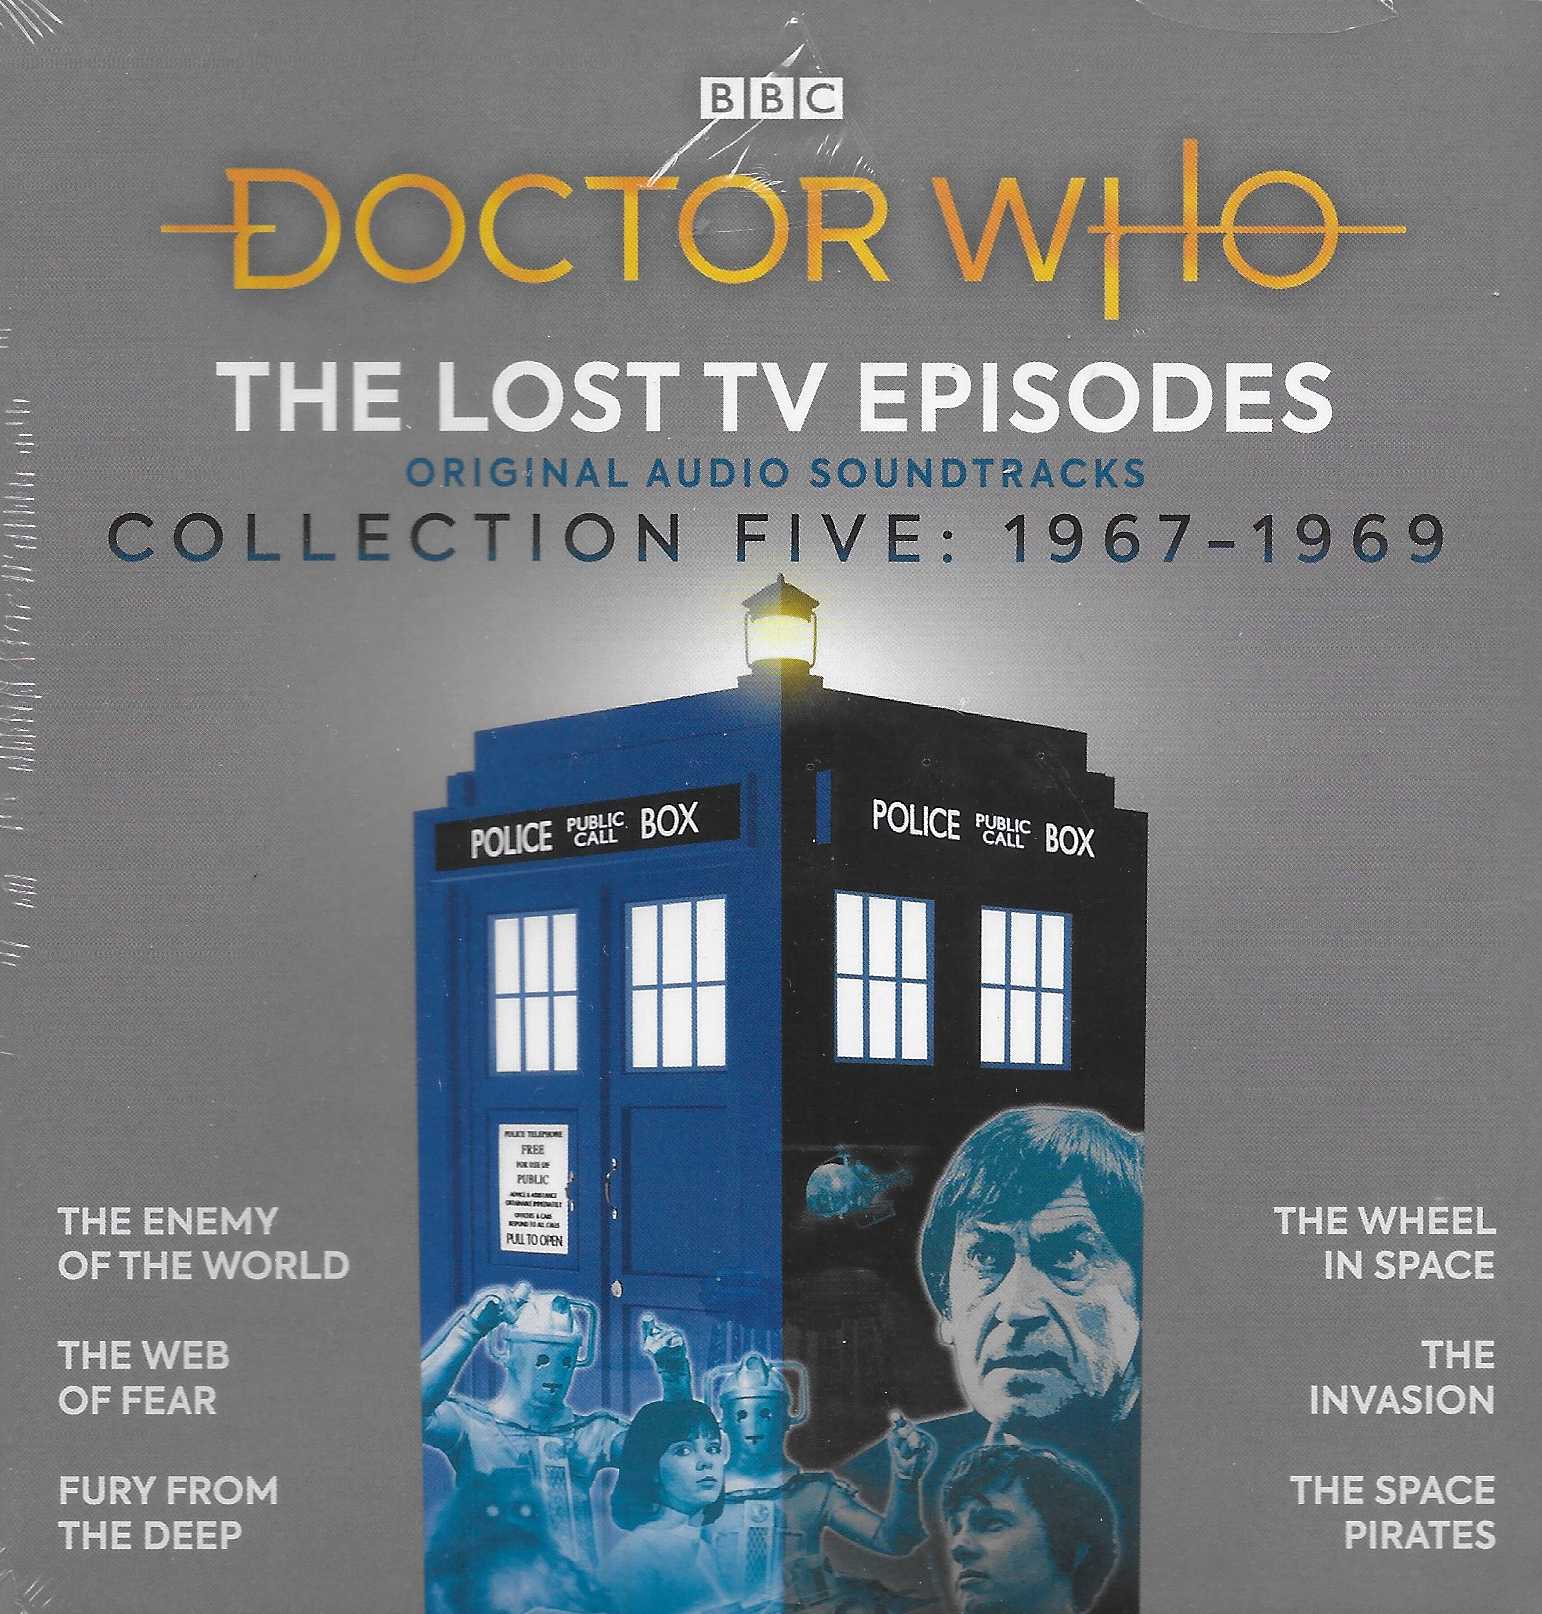 Picture of ISBN 978-1-52913-828-3 Doctor Who - The lost TV episodes - Collection five: 1967-1969 by artist Various from the BBC cds - Records and Tapes library